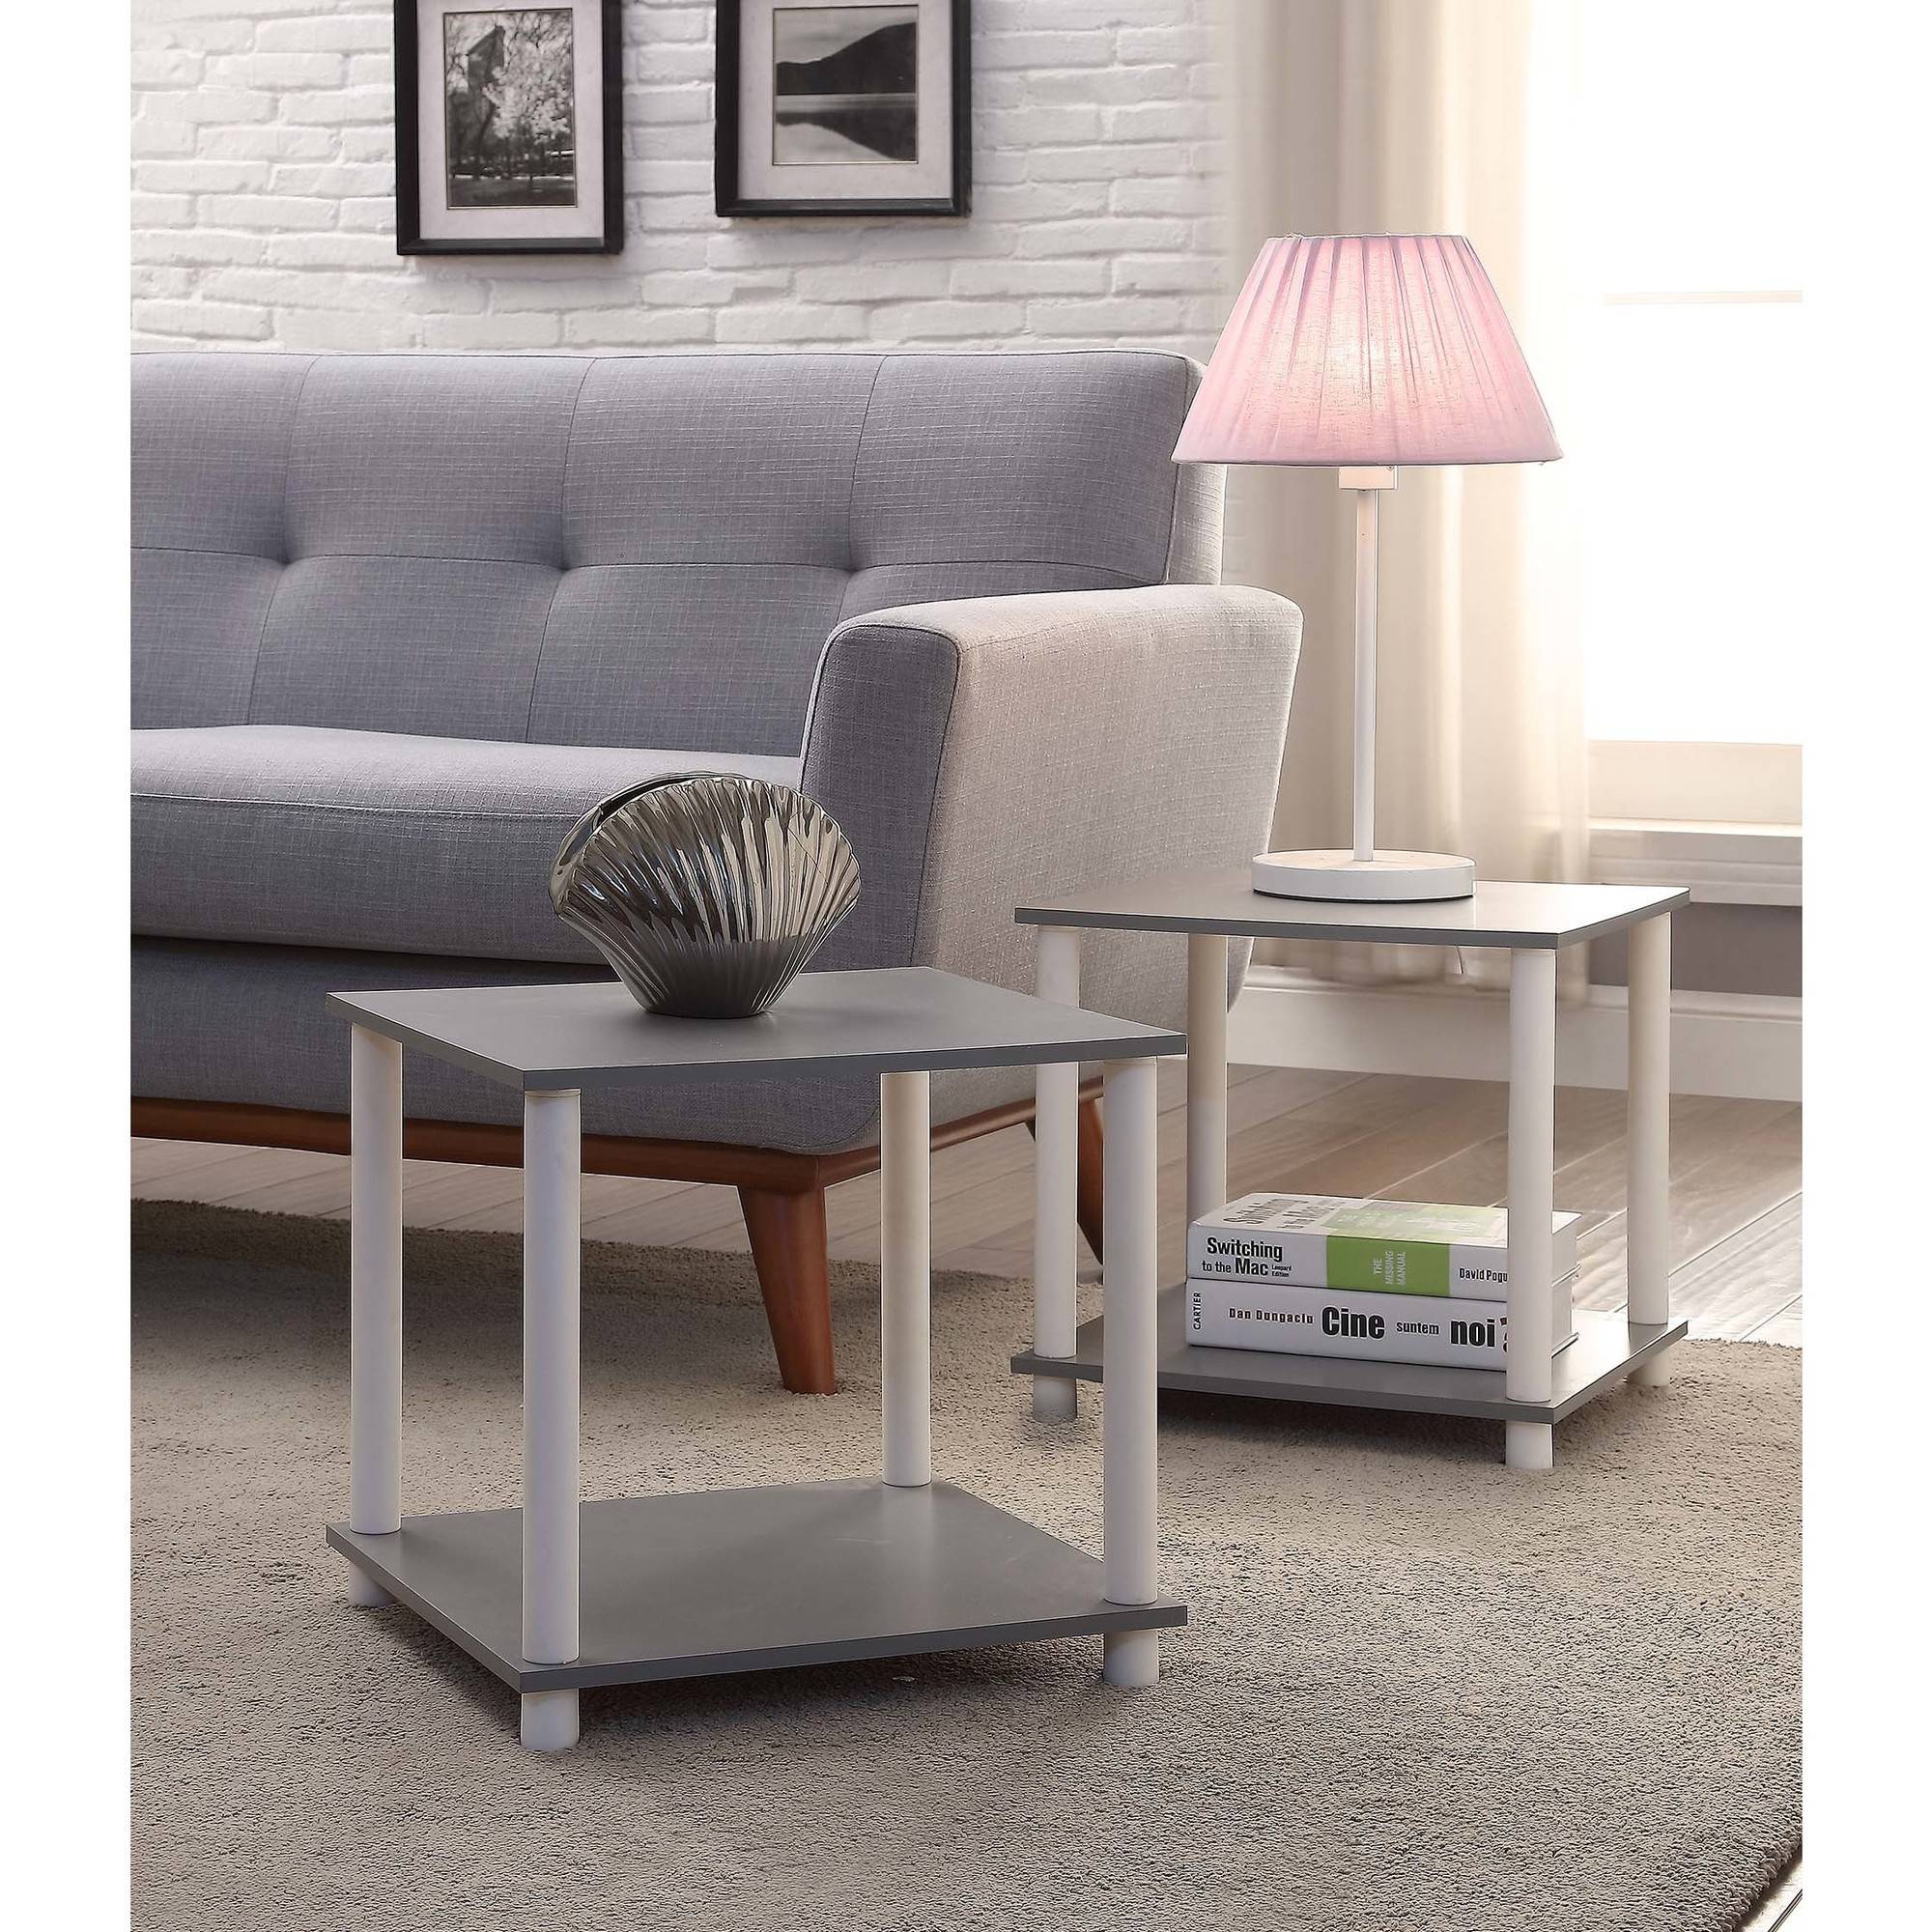 mainstays tools cube multiple colors living room end tables set ashley furniture ethan allen court buffet sectional sleeper high nightstand gray wood formal dining side table